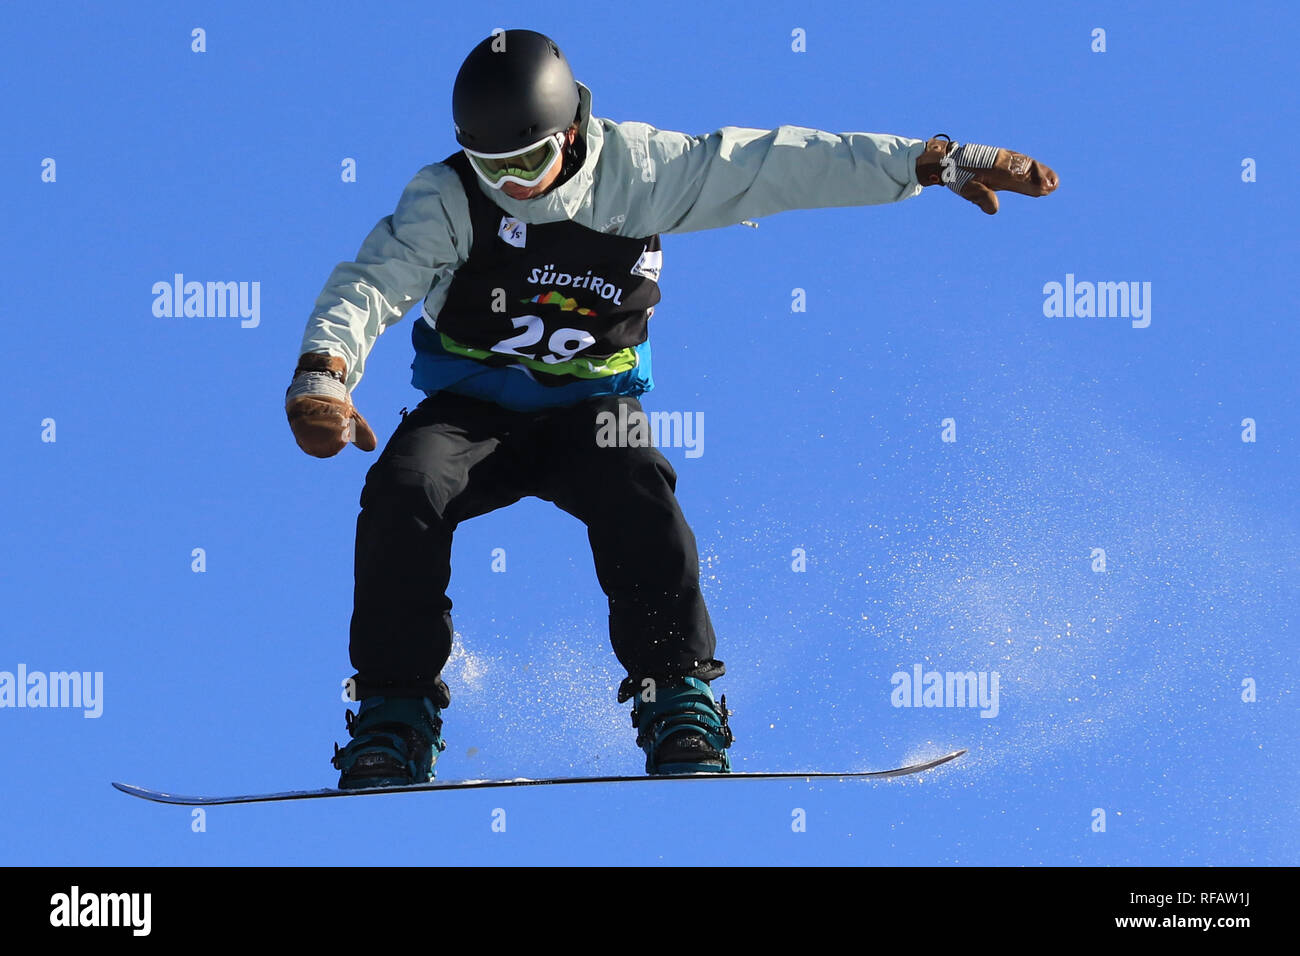 Seiseralm, Italy. 24th Jan, 2019. FIS Snowboard Slopestyle qualification;  Naj Mekinc (SLO) in action on a jump Credit: Action Plus Sports/Alamy Live  News Stock Photo - Alamy